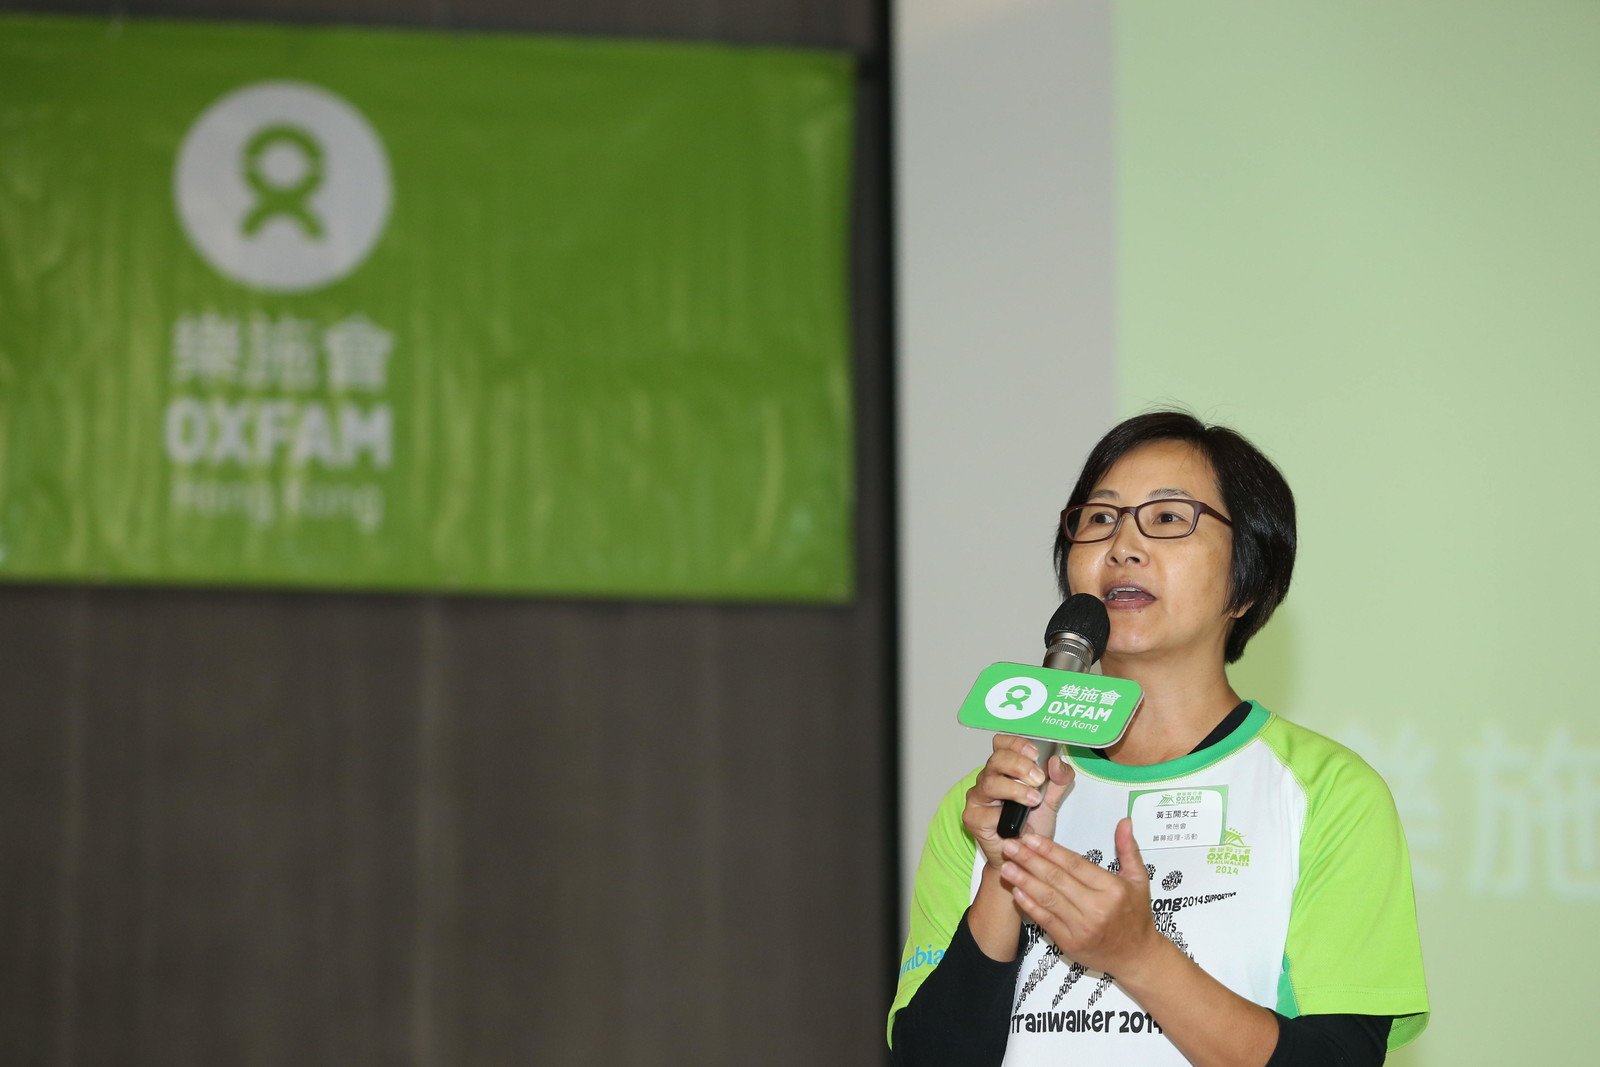 Brenda Wong (Fundraising Manager – Events, Oxfam Hong Kong) briefed walkers and their supporters on event details and safety measures.